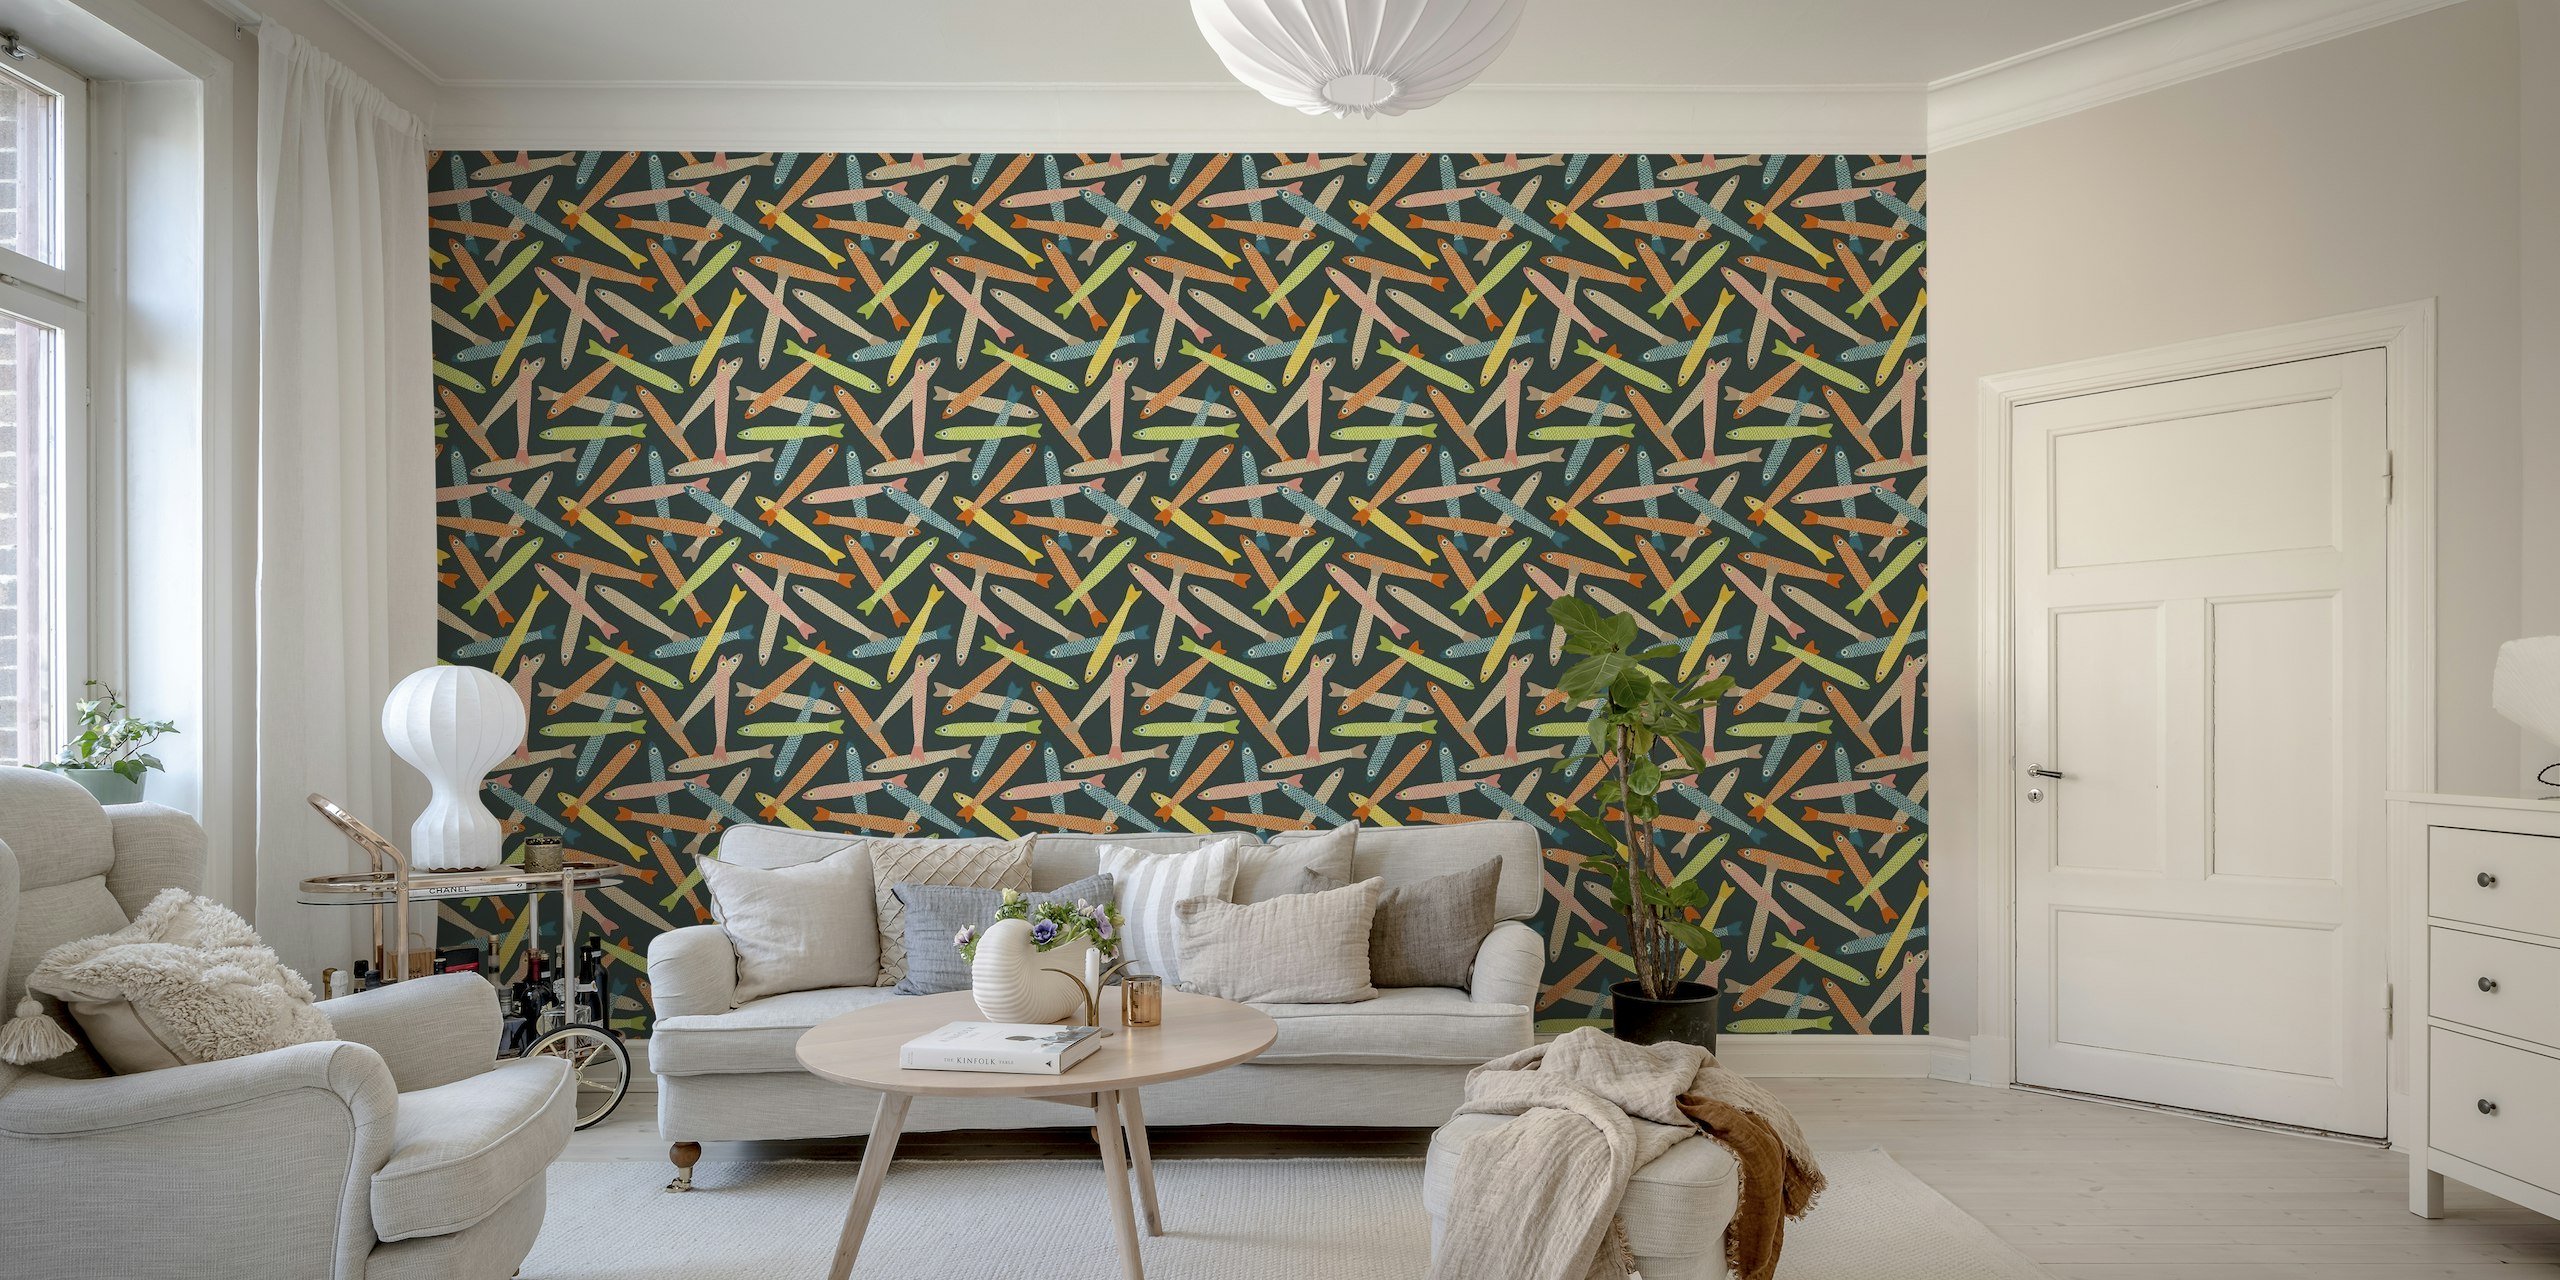 Colorful retro fish patterns scattered across a charcoal background on a wall mural.